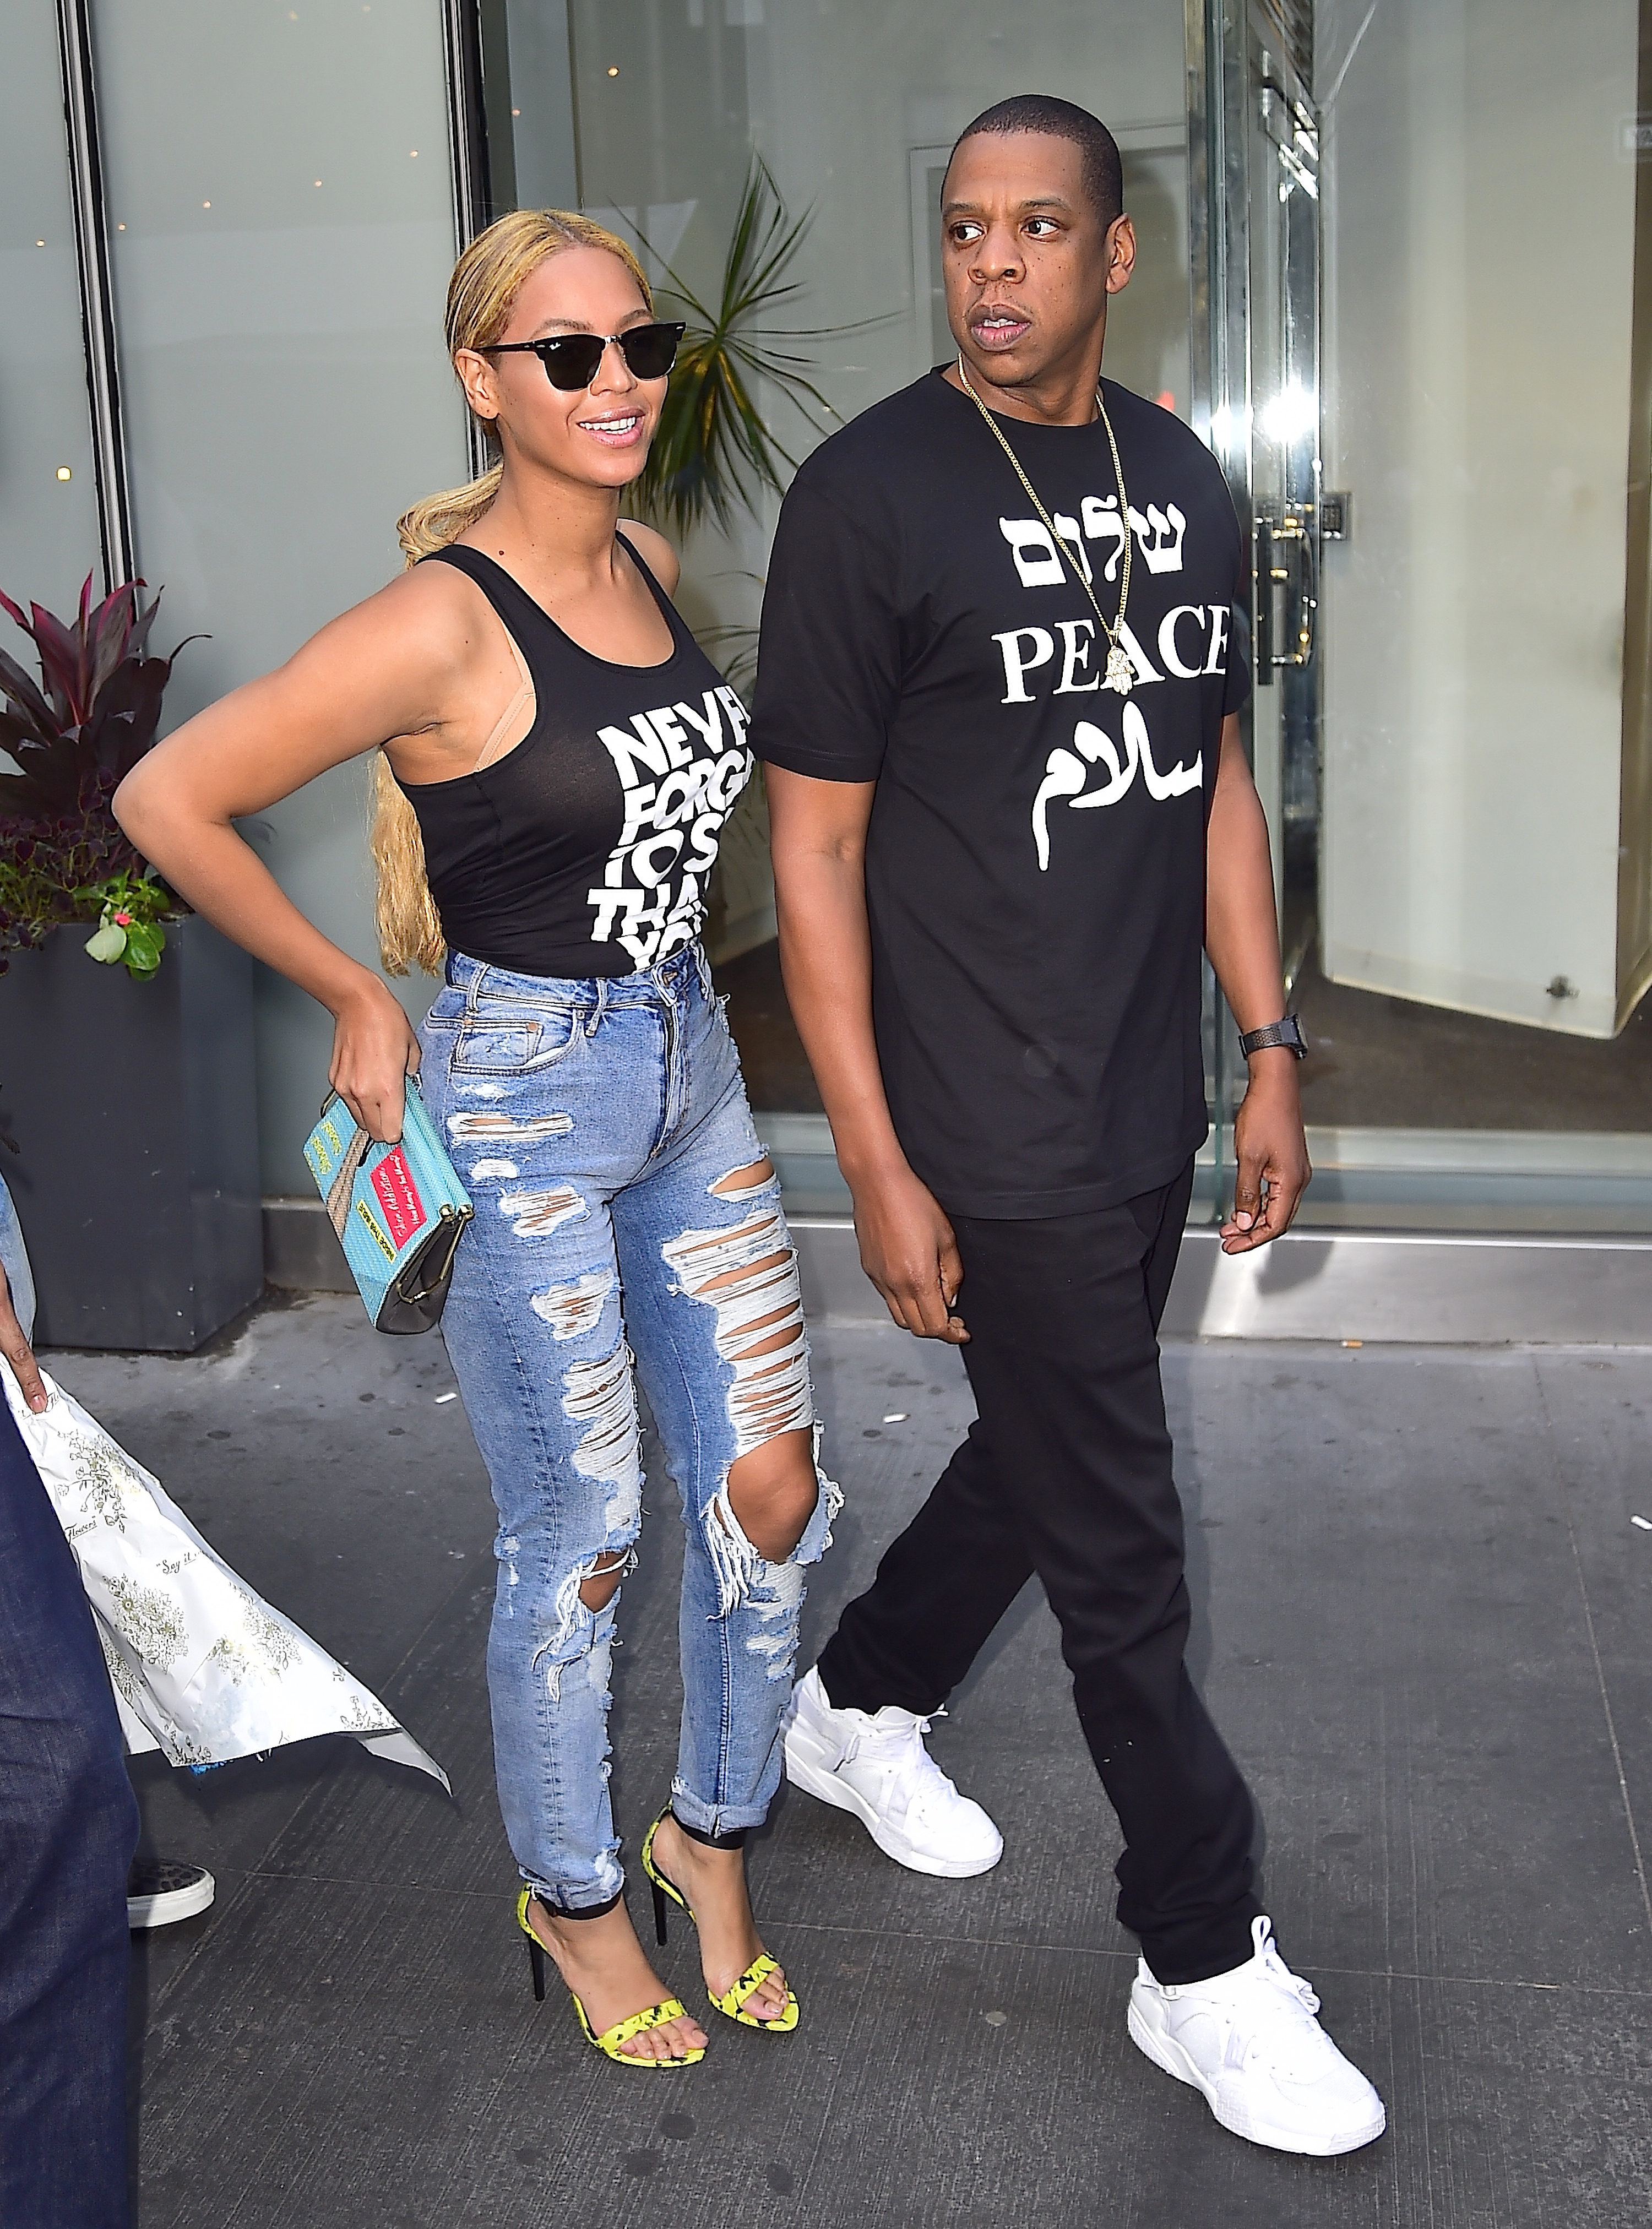 Beyonce and Jay Z are seen in Midtown on May 11, 2015 in New York City. (Photo by Alo Ceballos/GC Images) (Alo Ceballos—GC Images)